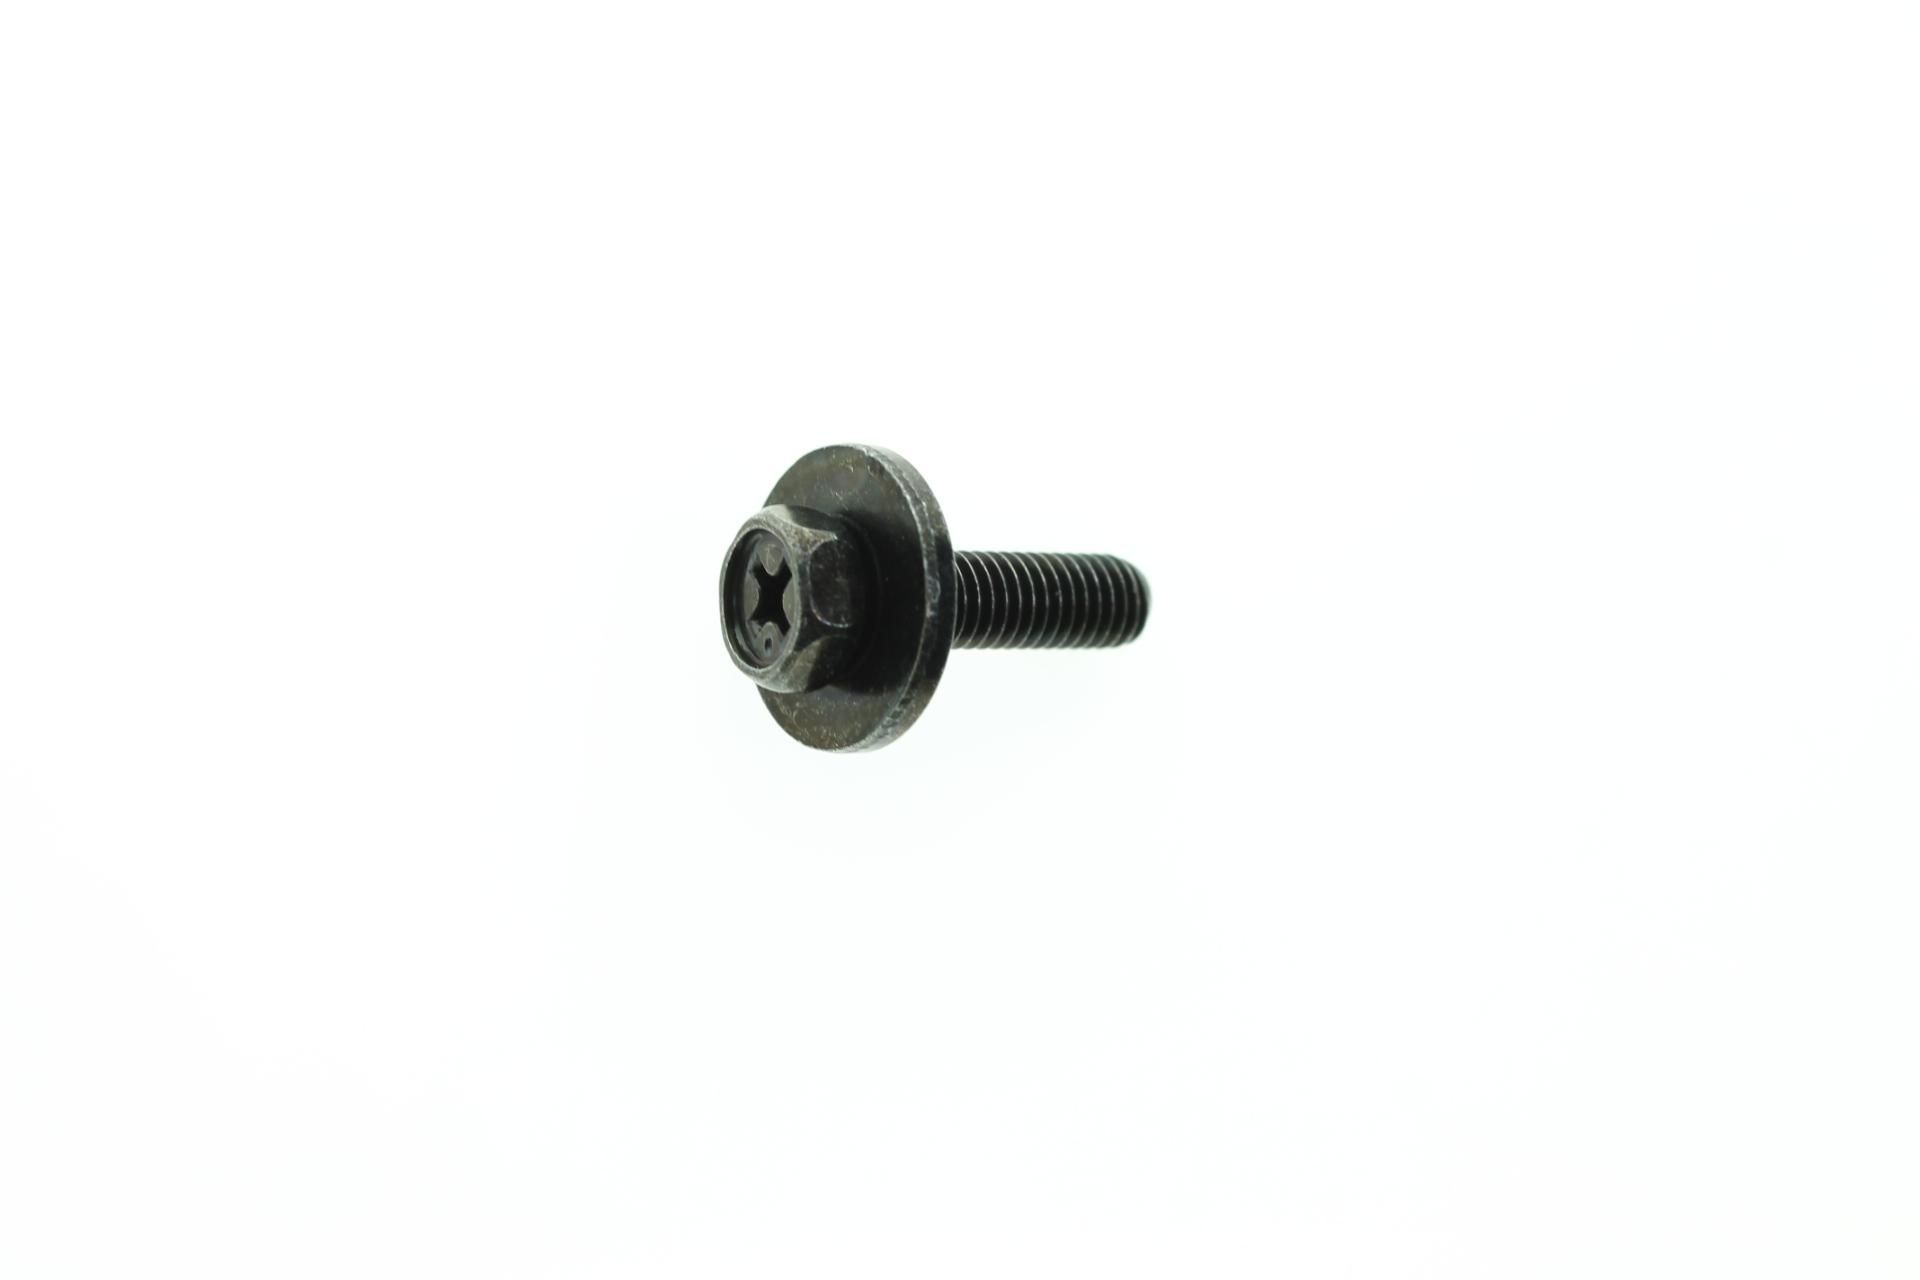 90119-05827-00 Superseded by 90119-05001-00 - BOLT,WITH WASHER